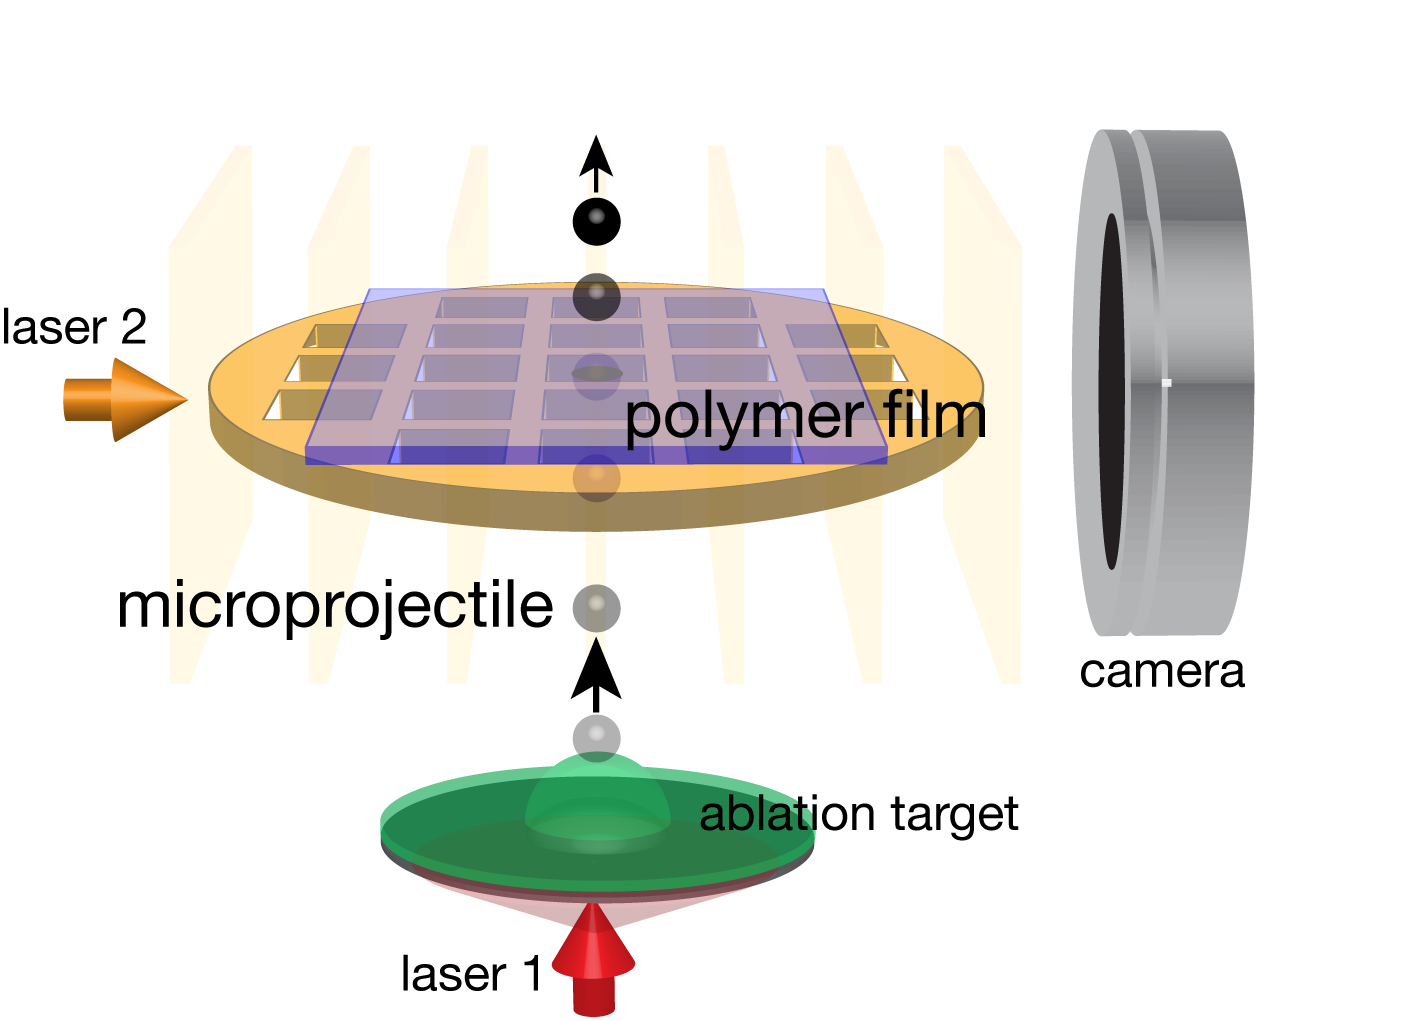 Diagram shows microprojectile as a small ball moving upward through a square of polymer film with camera to the right. 